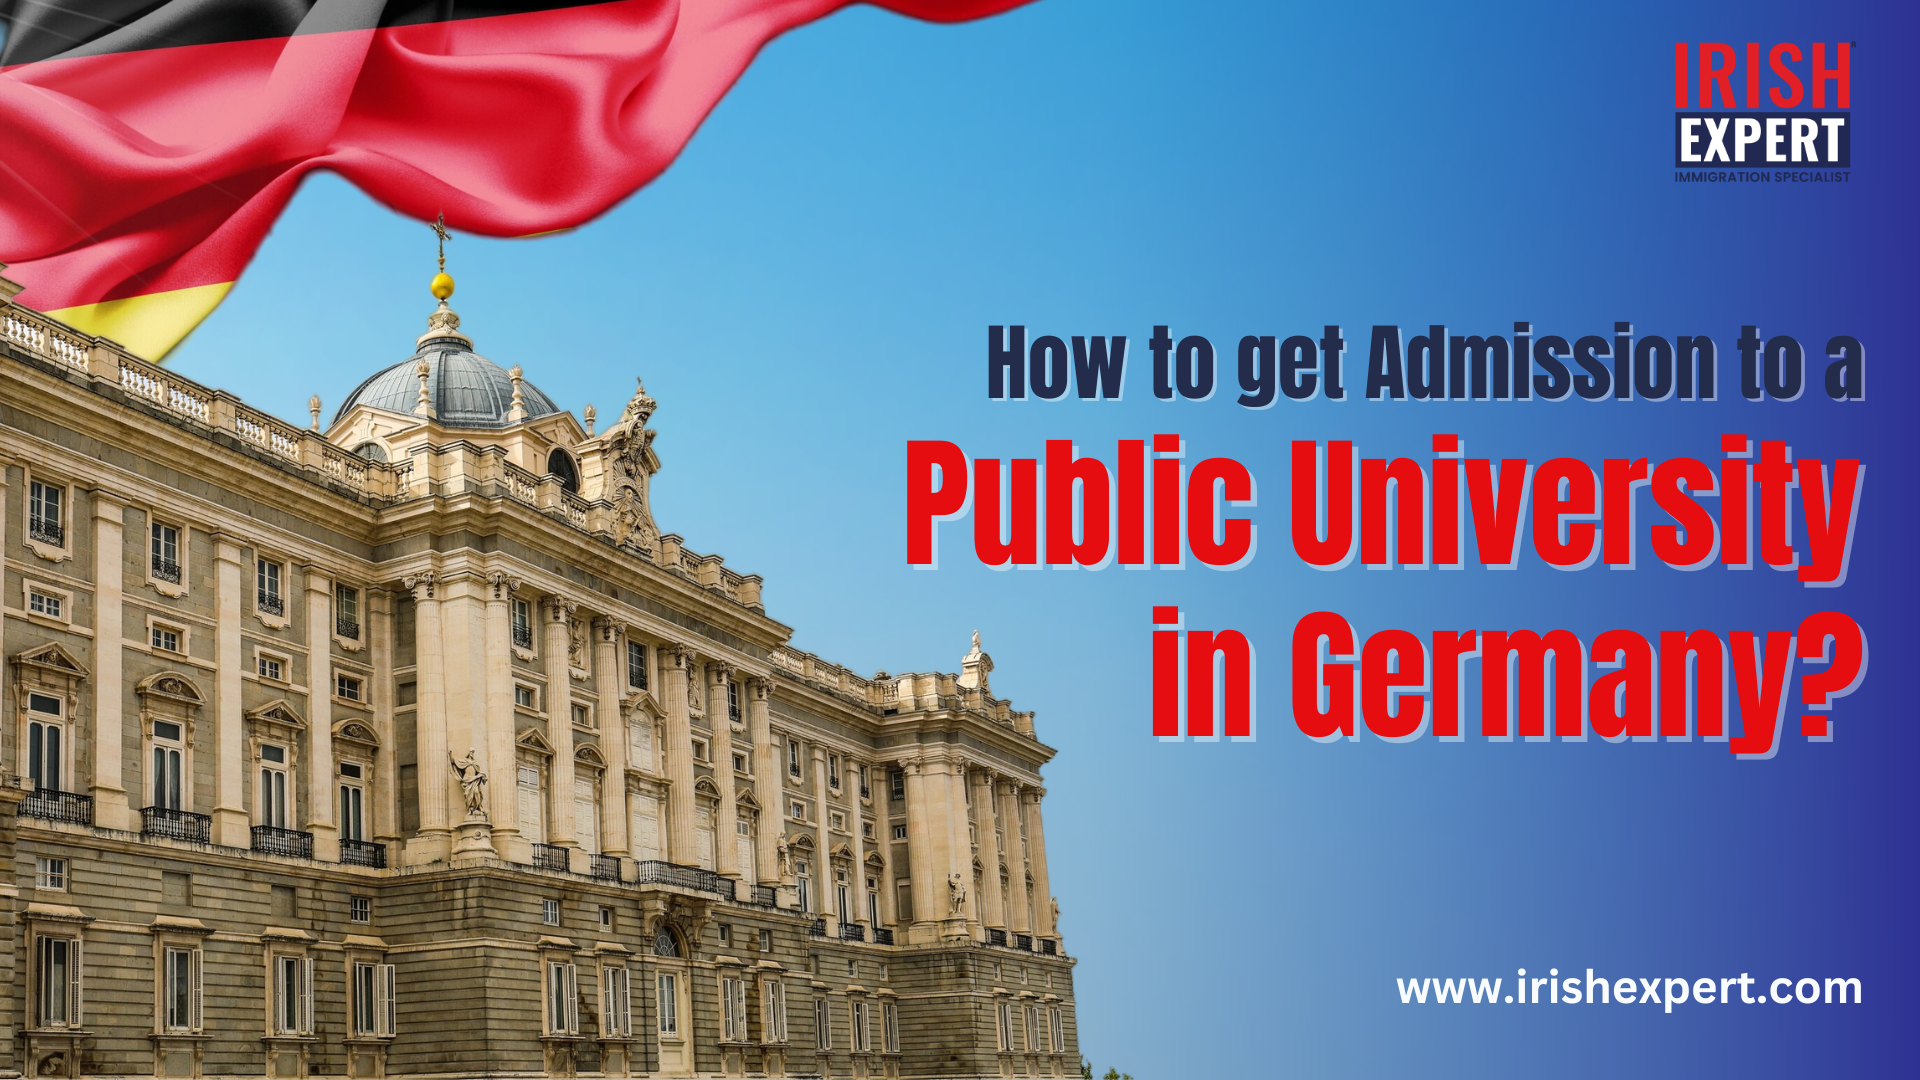 How to get Admission to a Public University in Germany?